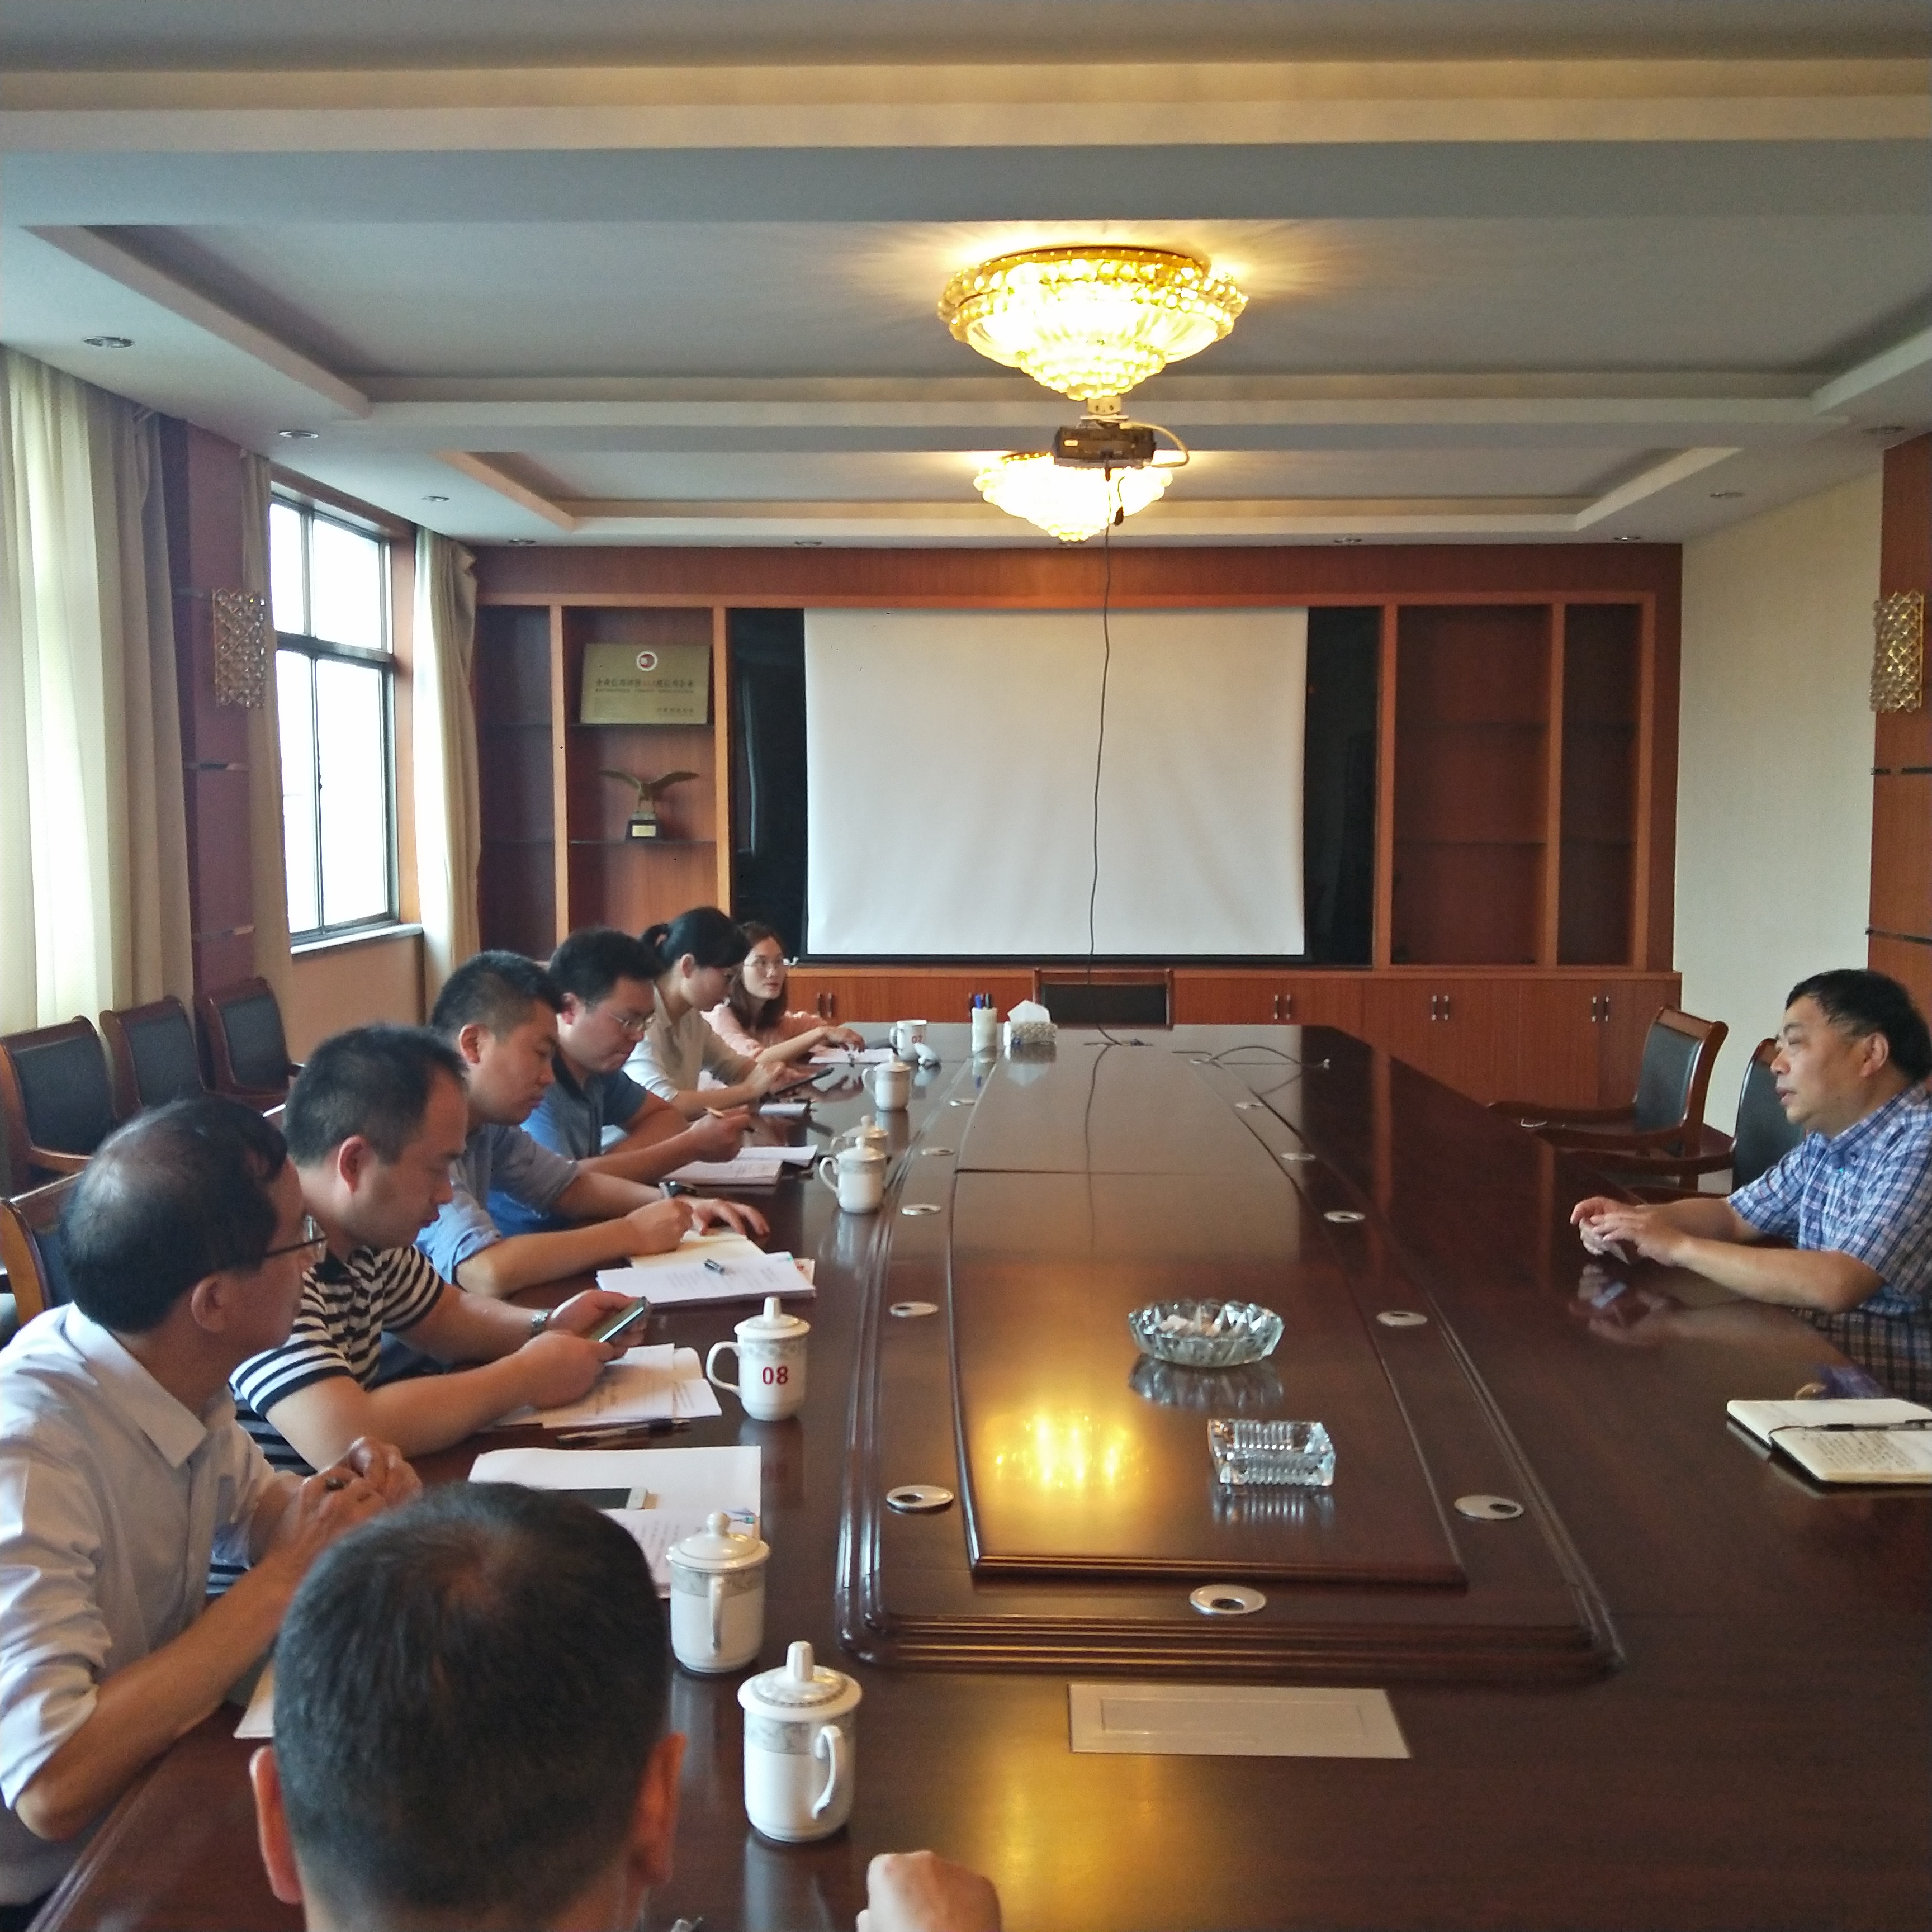 Anhui Province "four send one service" working group visited our company for investigation and guidance